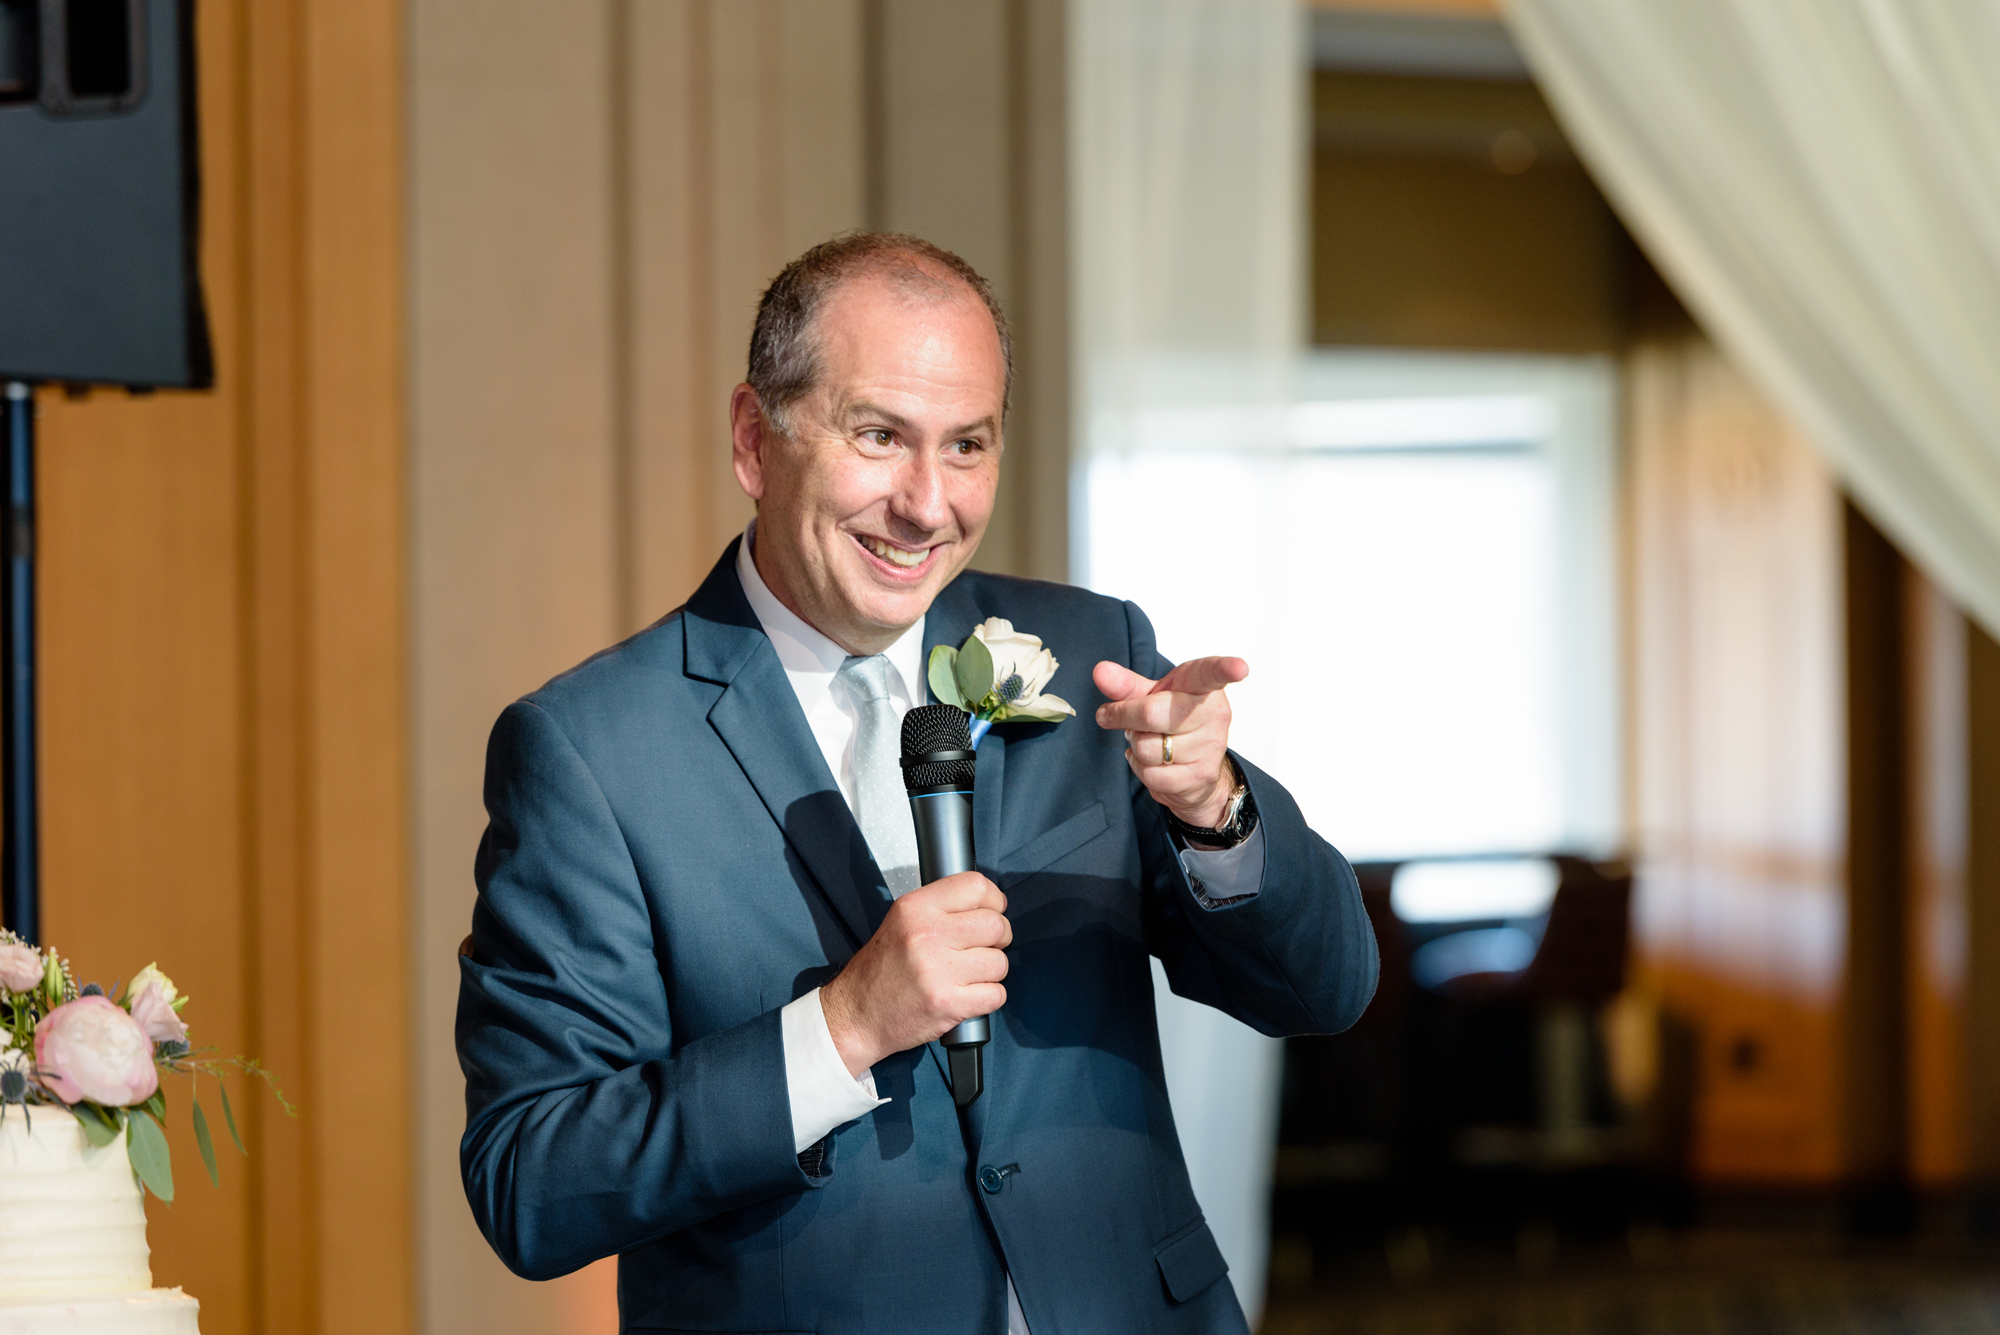 Father of the Bride’s Welcome Toast at a Wedding Reception at Dahnke Ballroom of Venue ND